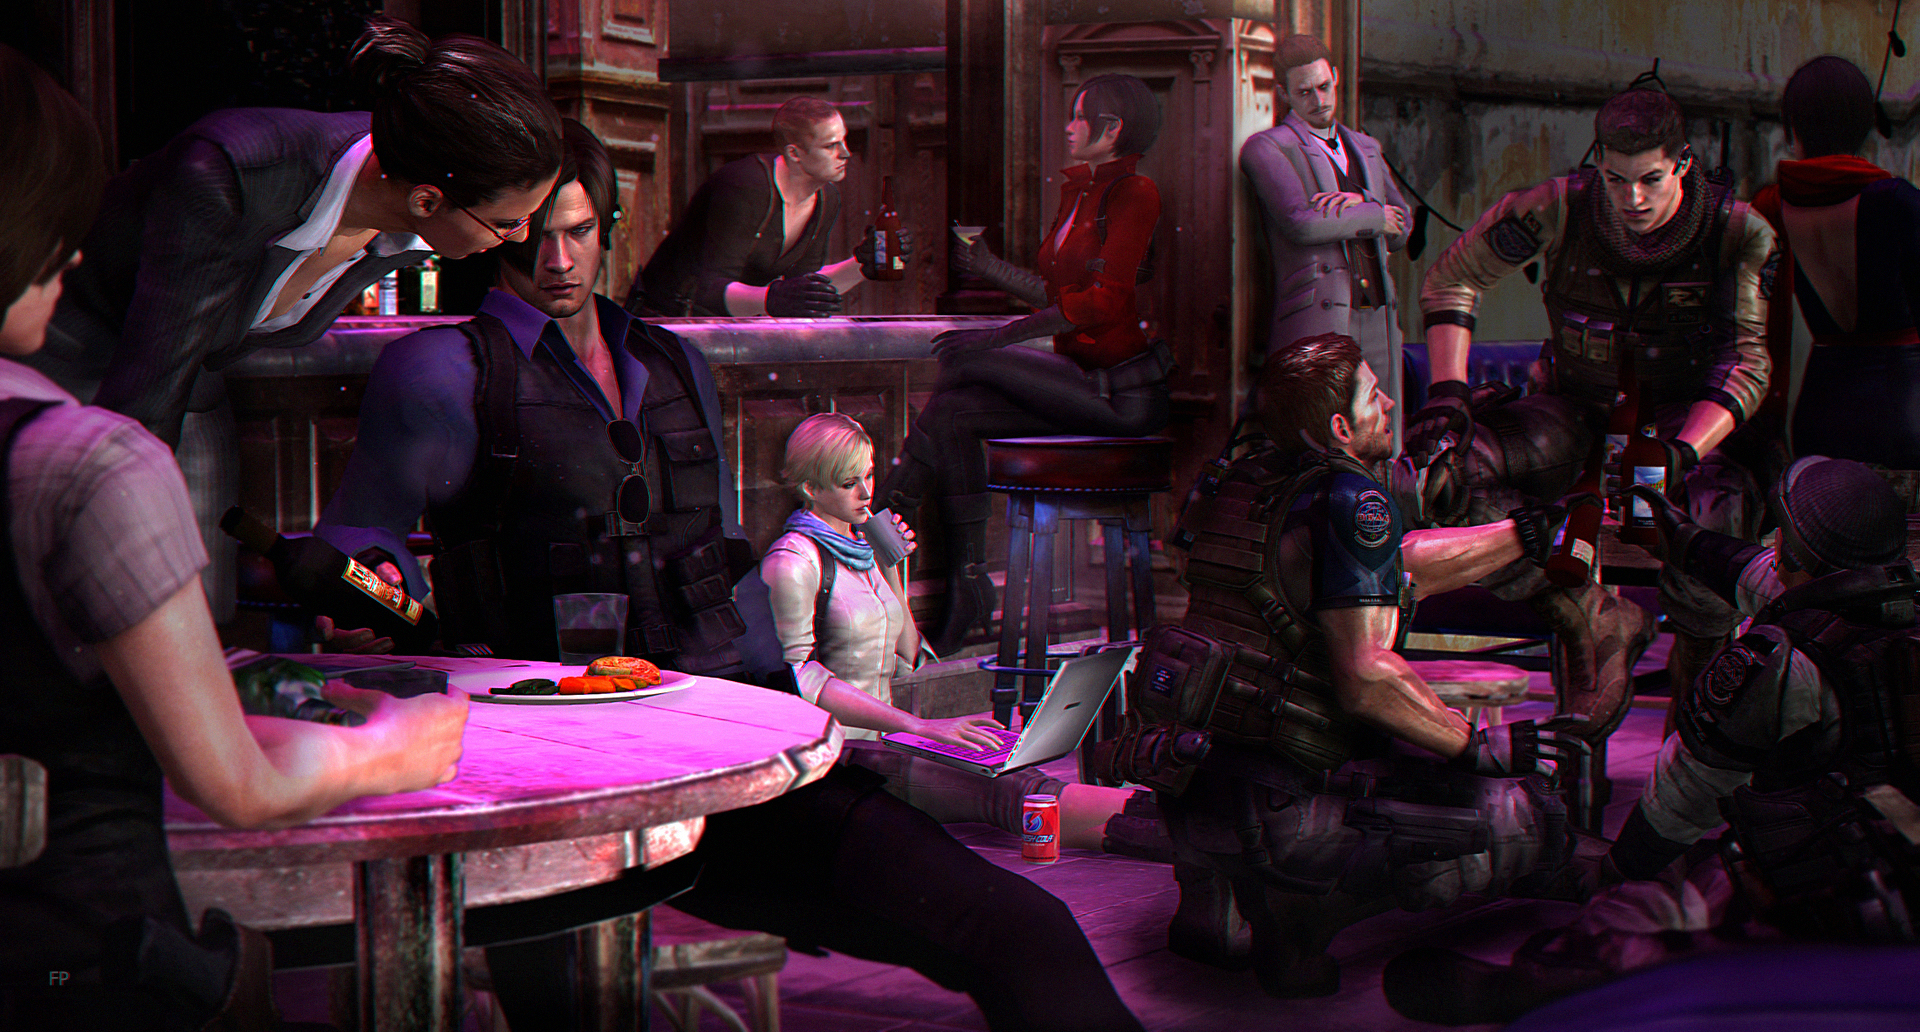 Resident evil 6 - A little party